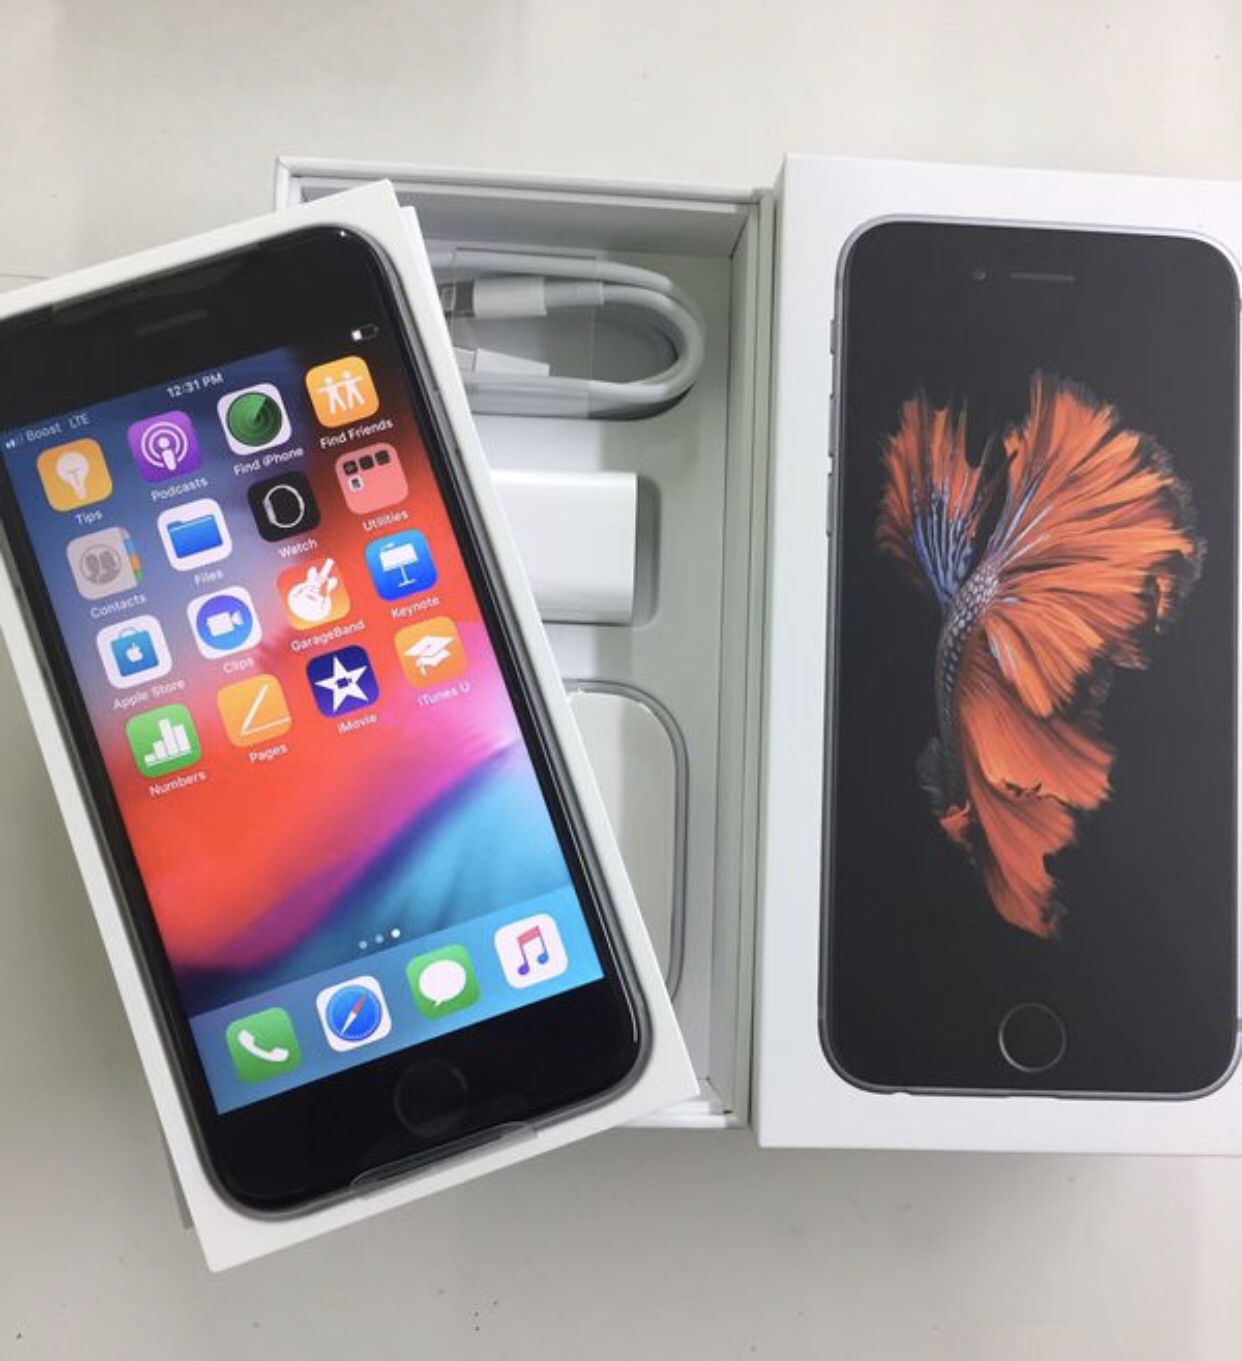 iPhone 6s with 32gb